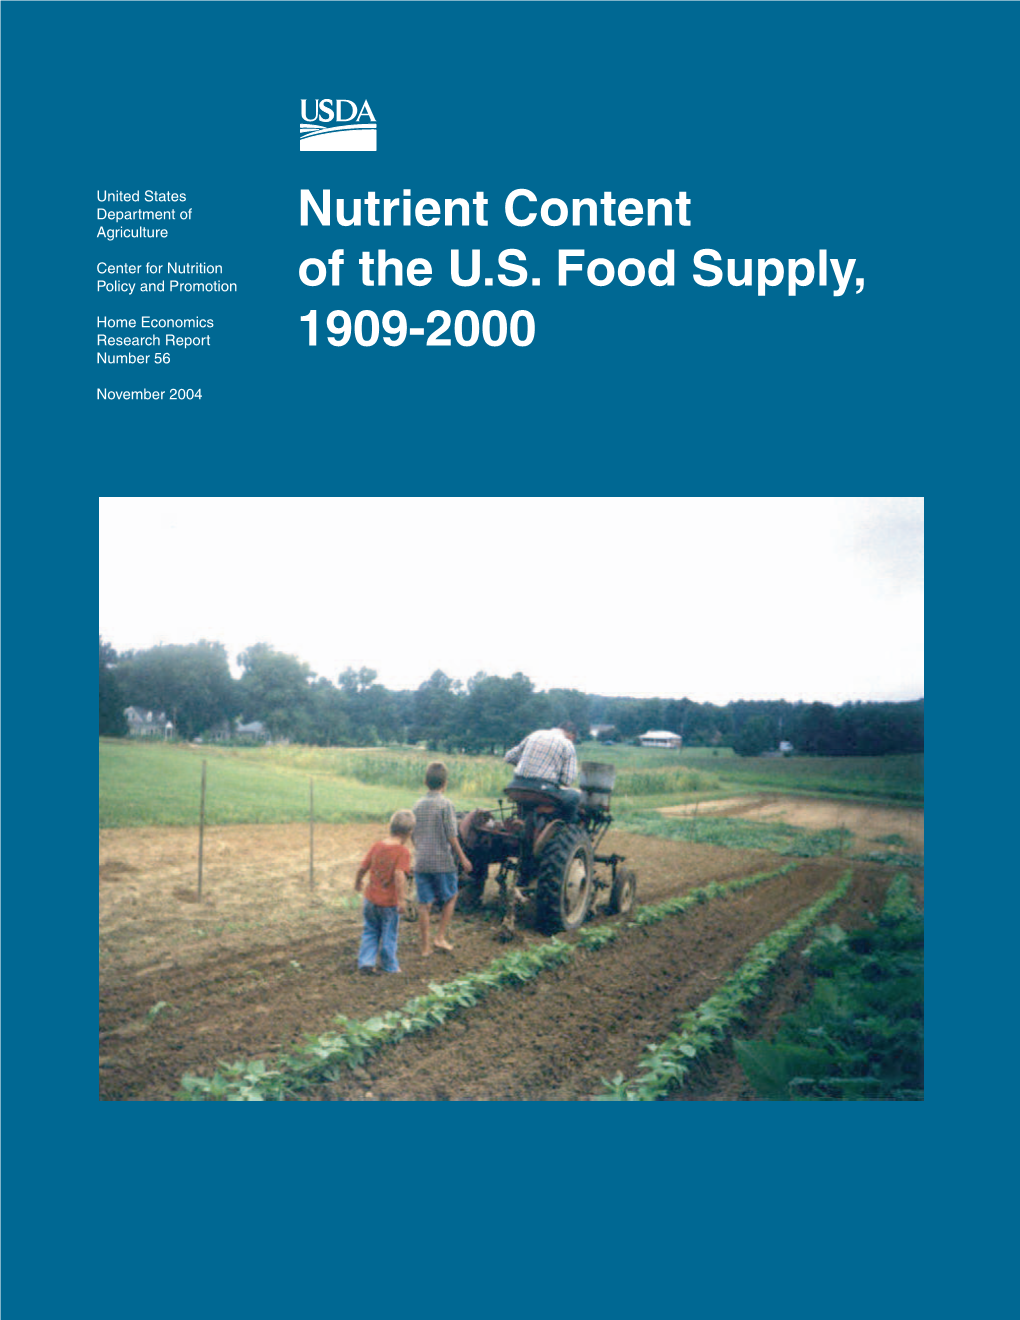 Nutrient Content of the U.S. Food Supply, 1909-2000